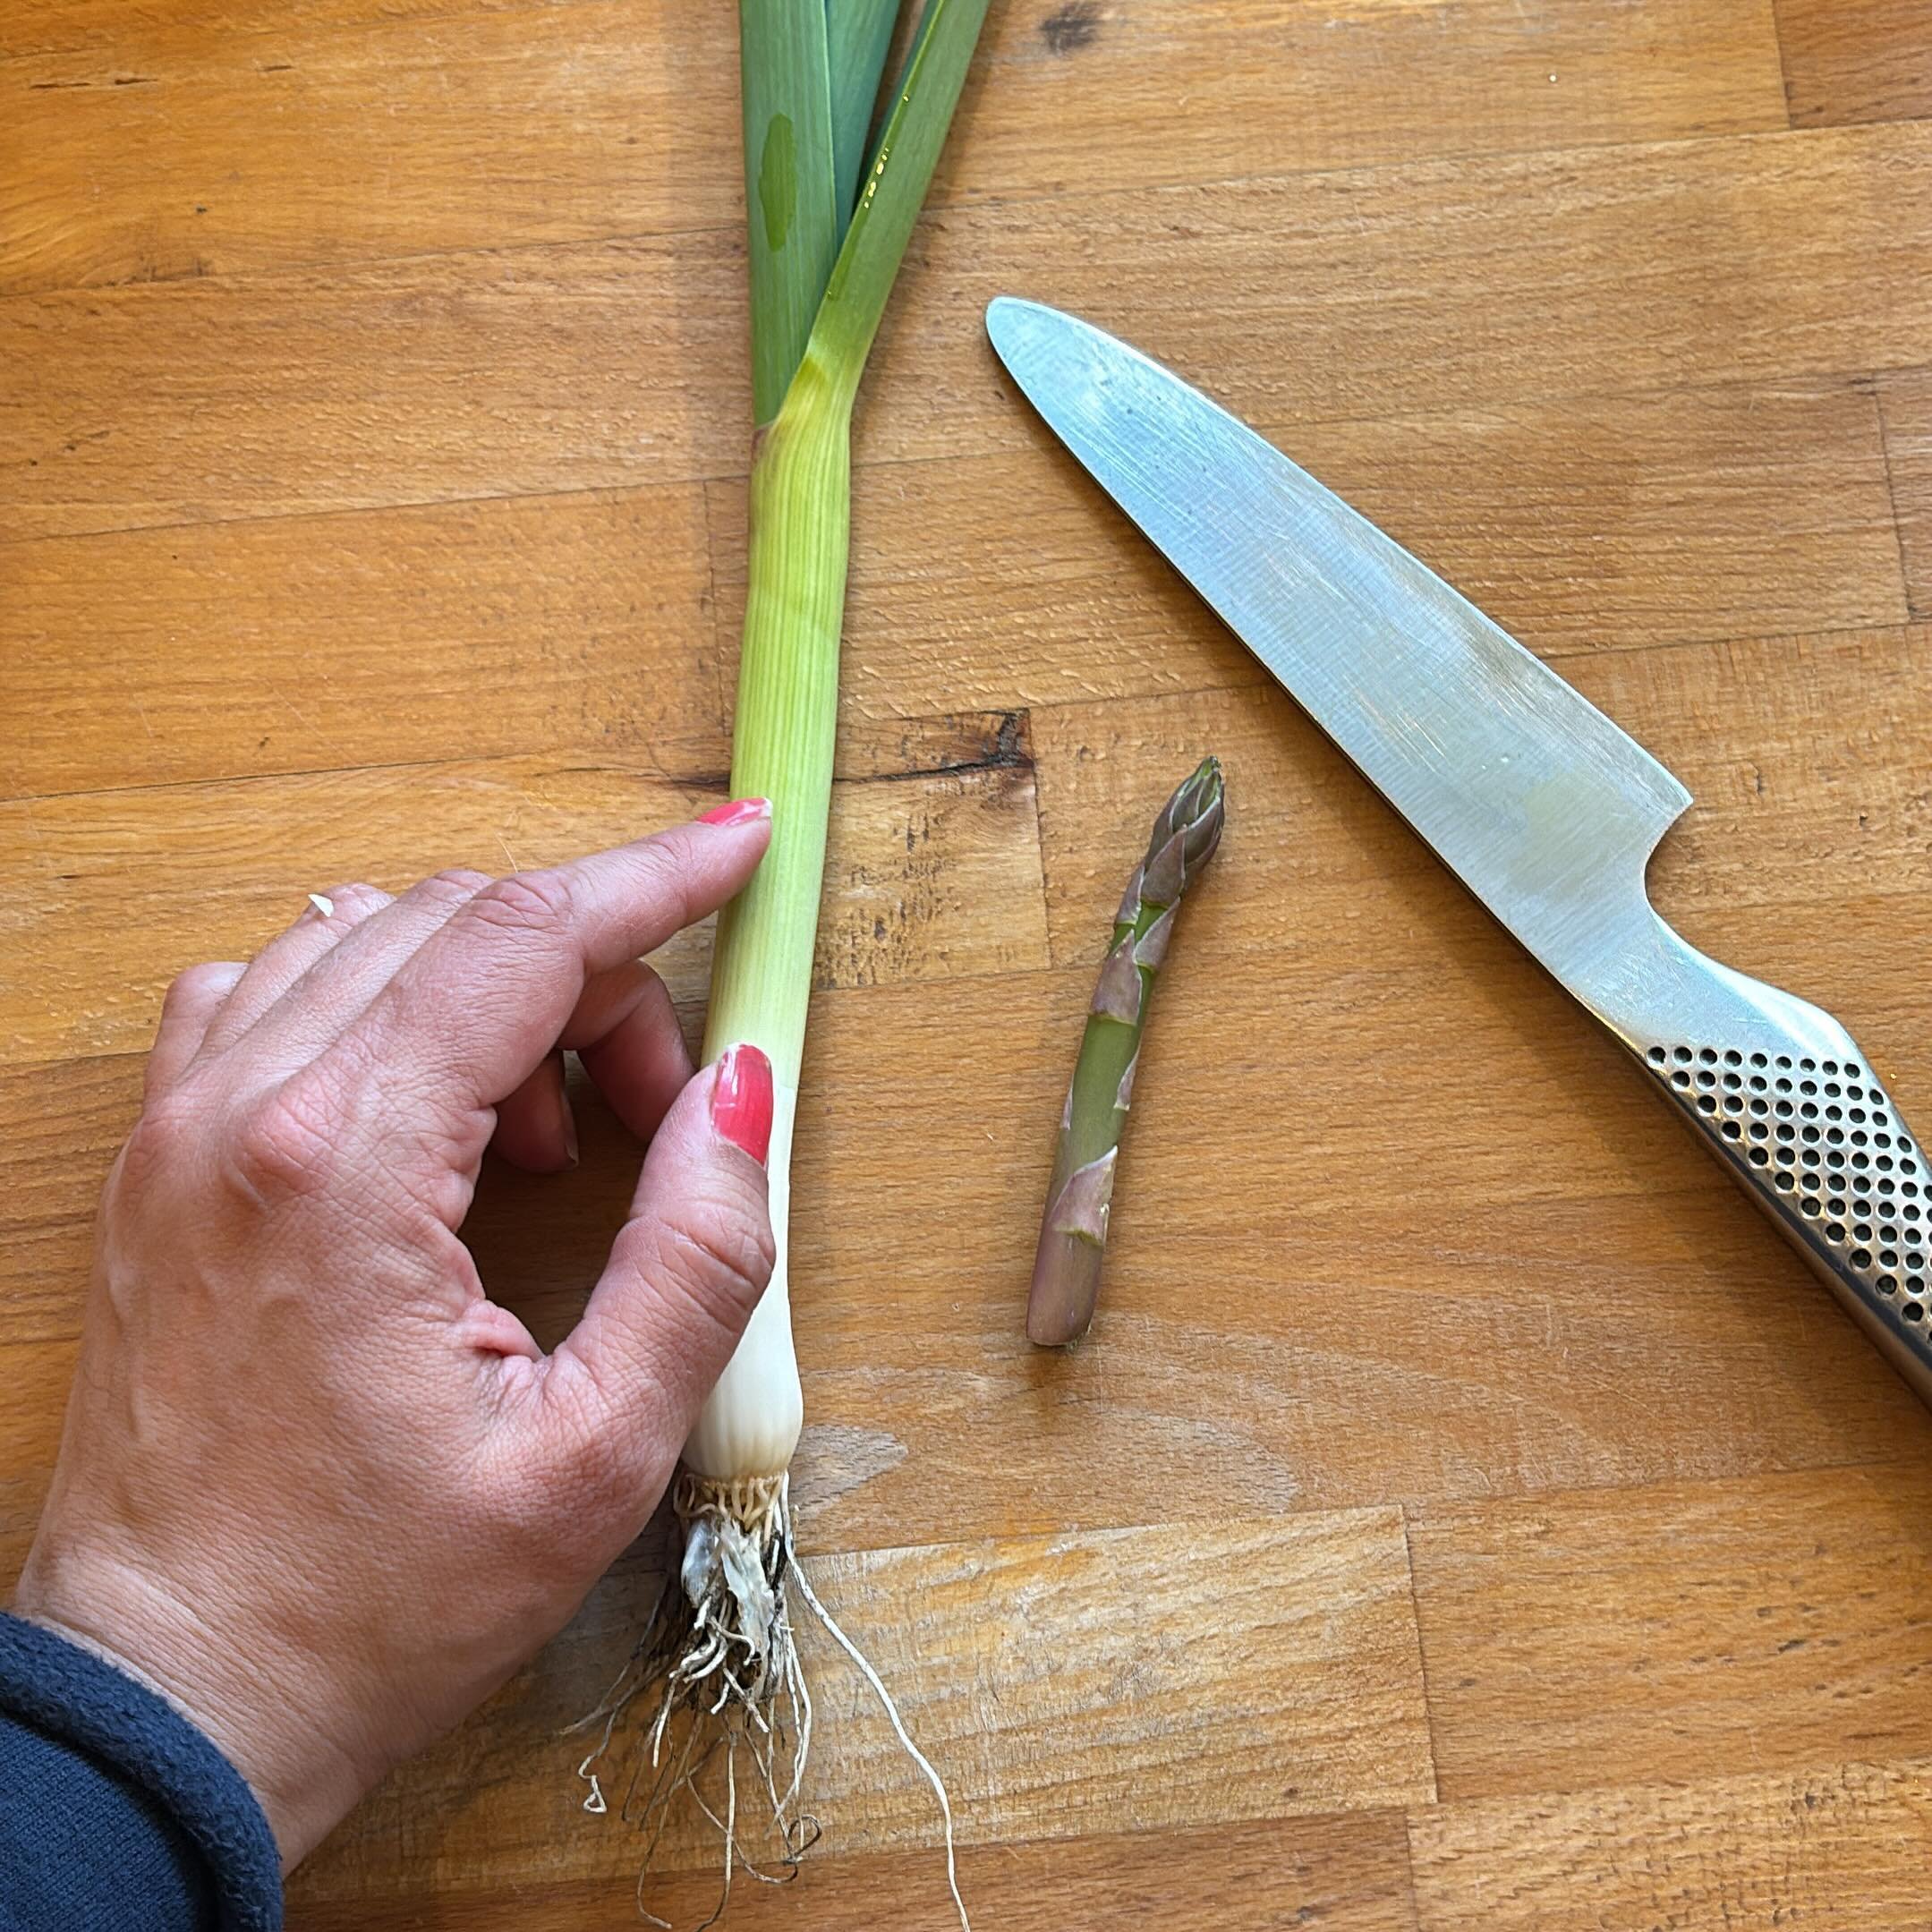 Home grown garlic and half an asparagus we also grew. The cat snapped it off this morning as she rolled around with her mouse breakfast. Naked morning cat chasing is now a thing on this road🌱☀️ &hellip; him not me. 😁 #homegrownforthewin